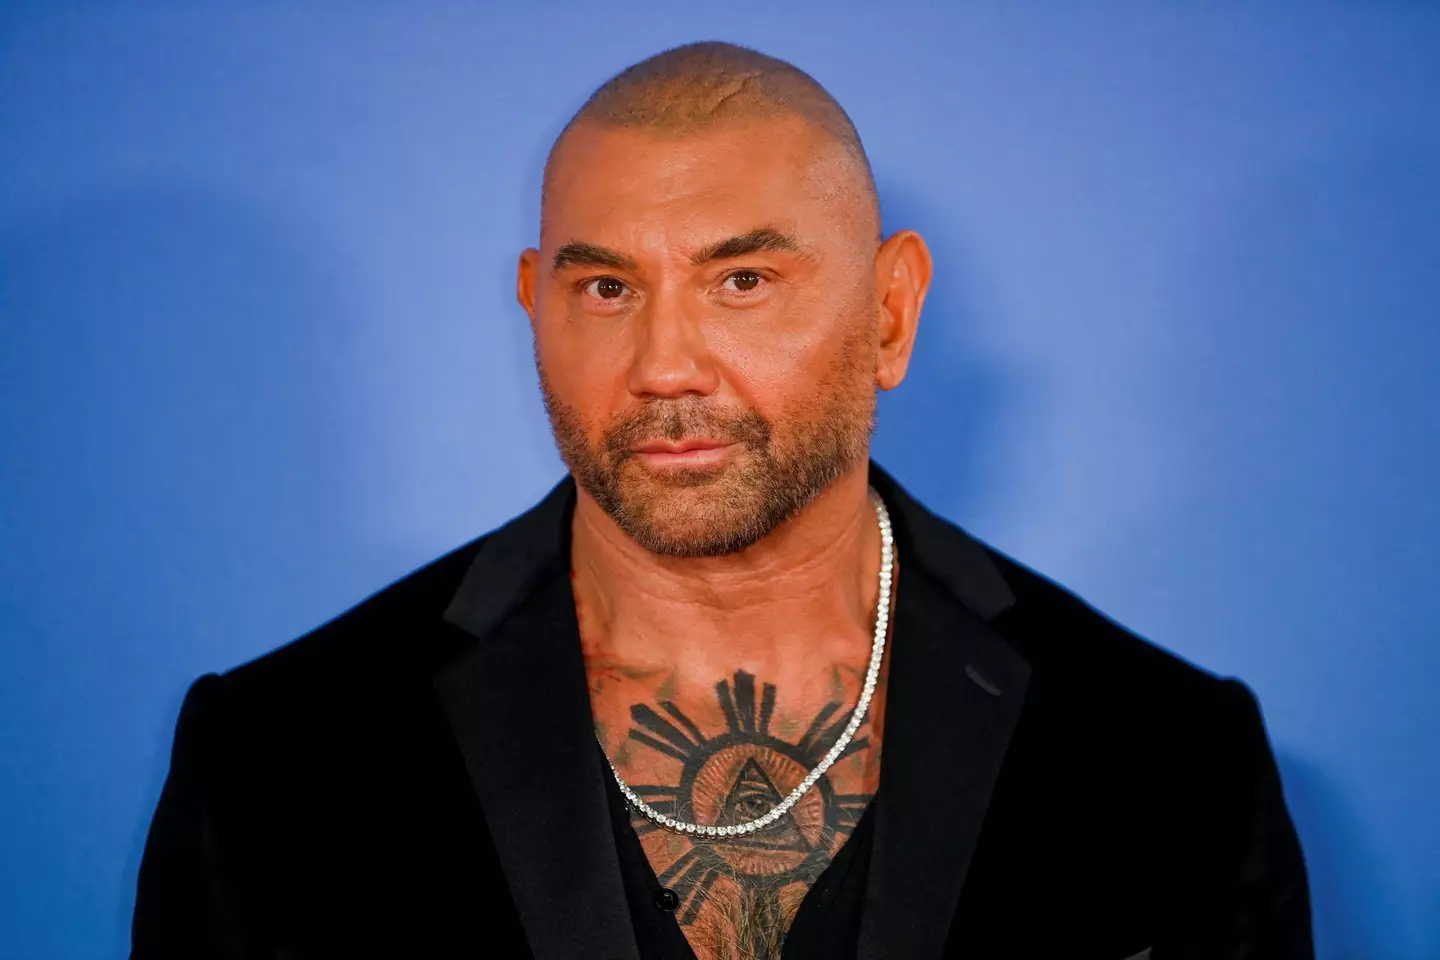 Many have called for Dave Bautista to be involved in the Gears of War movie.